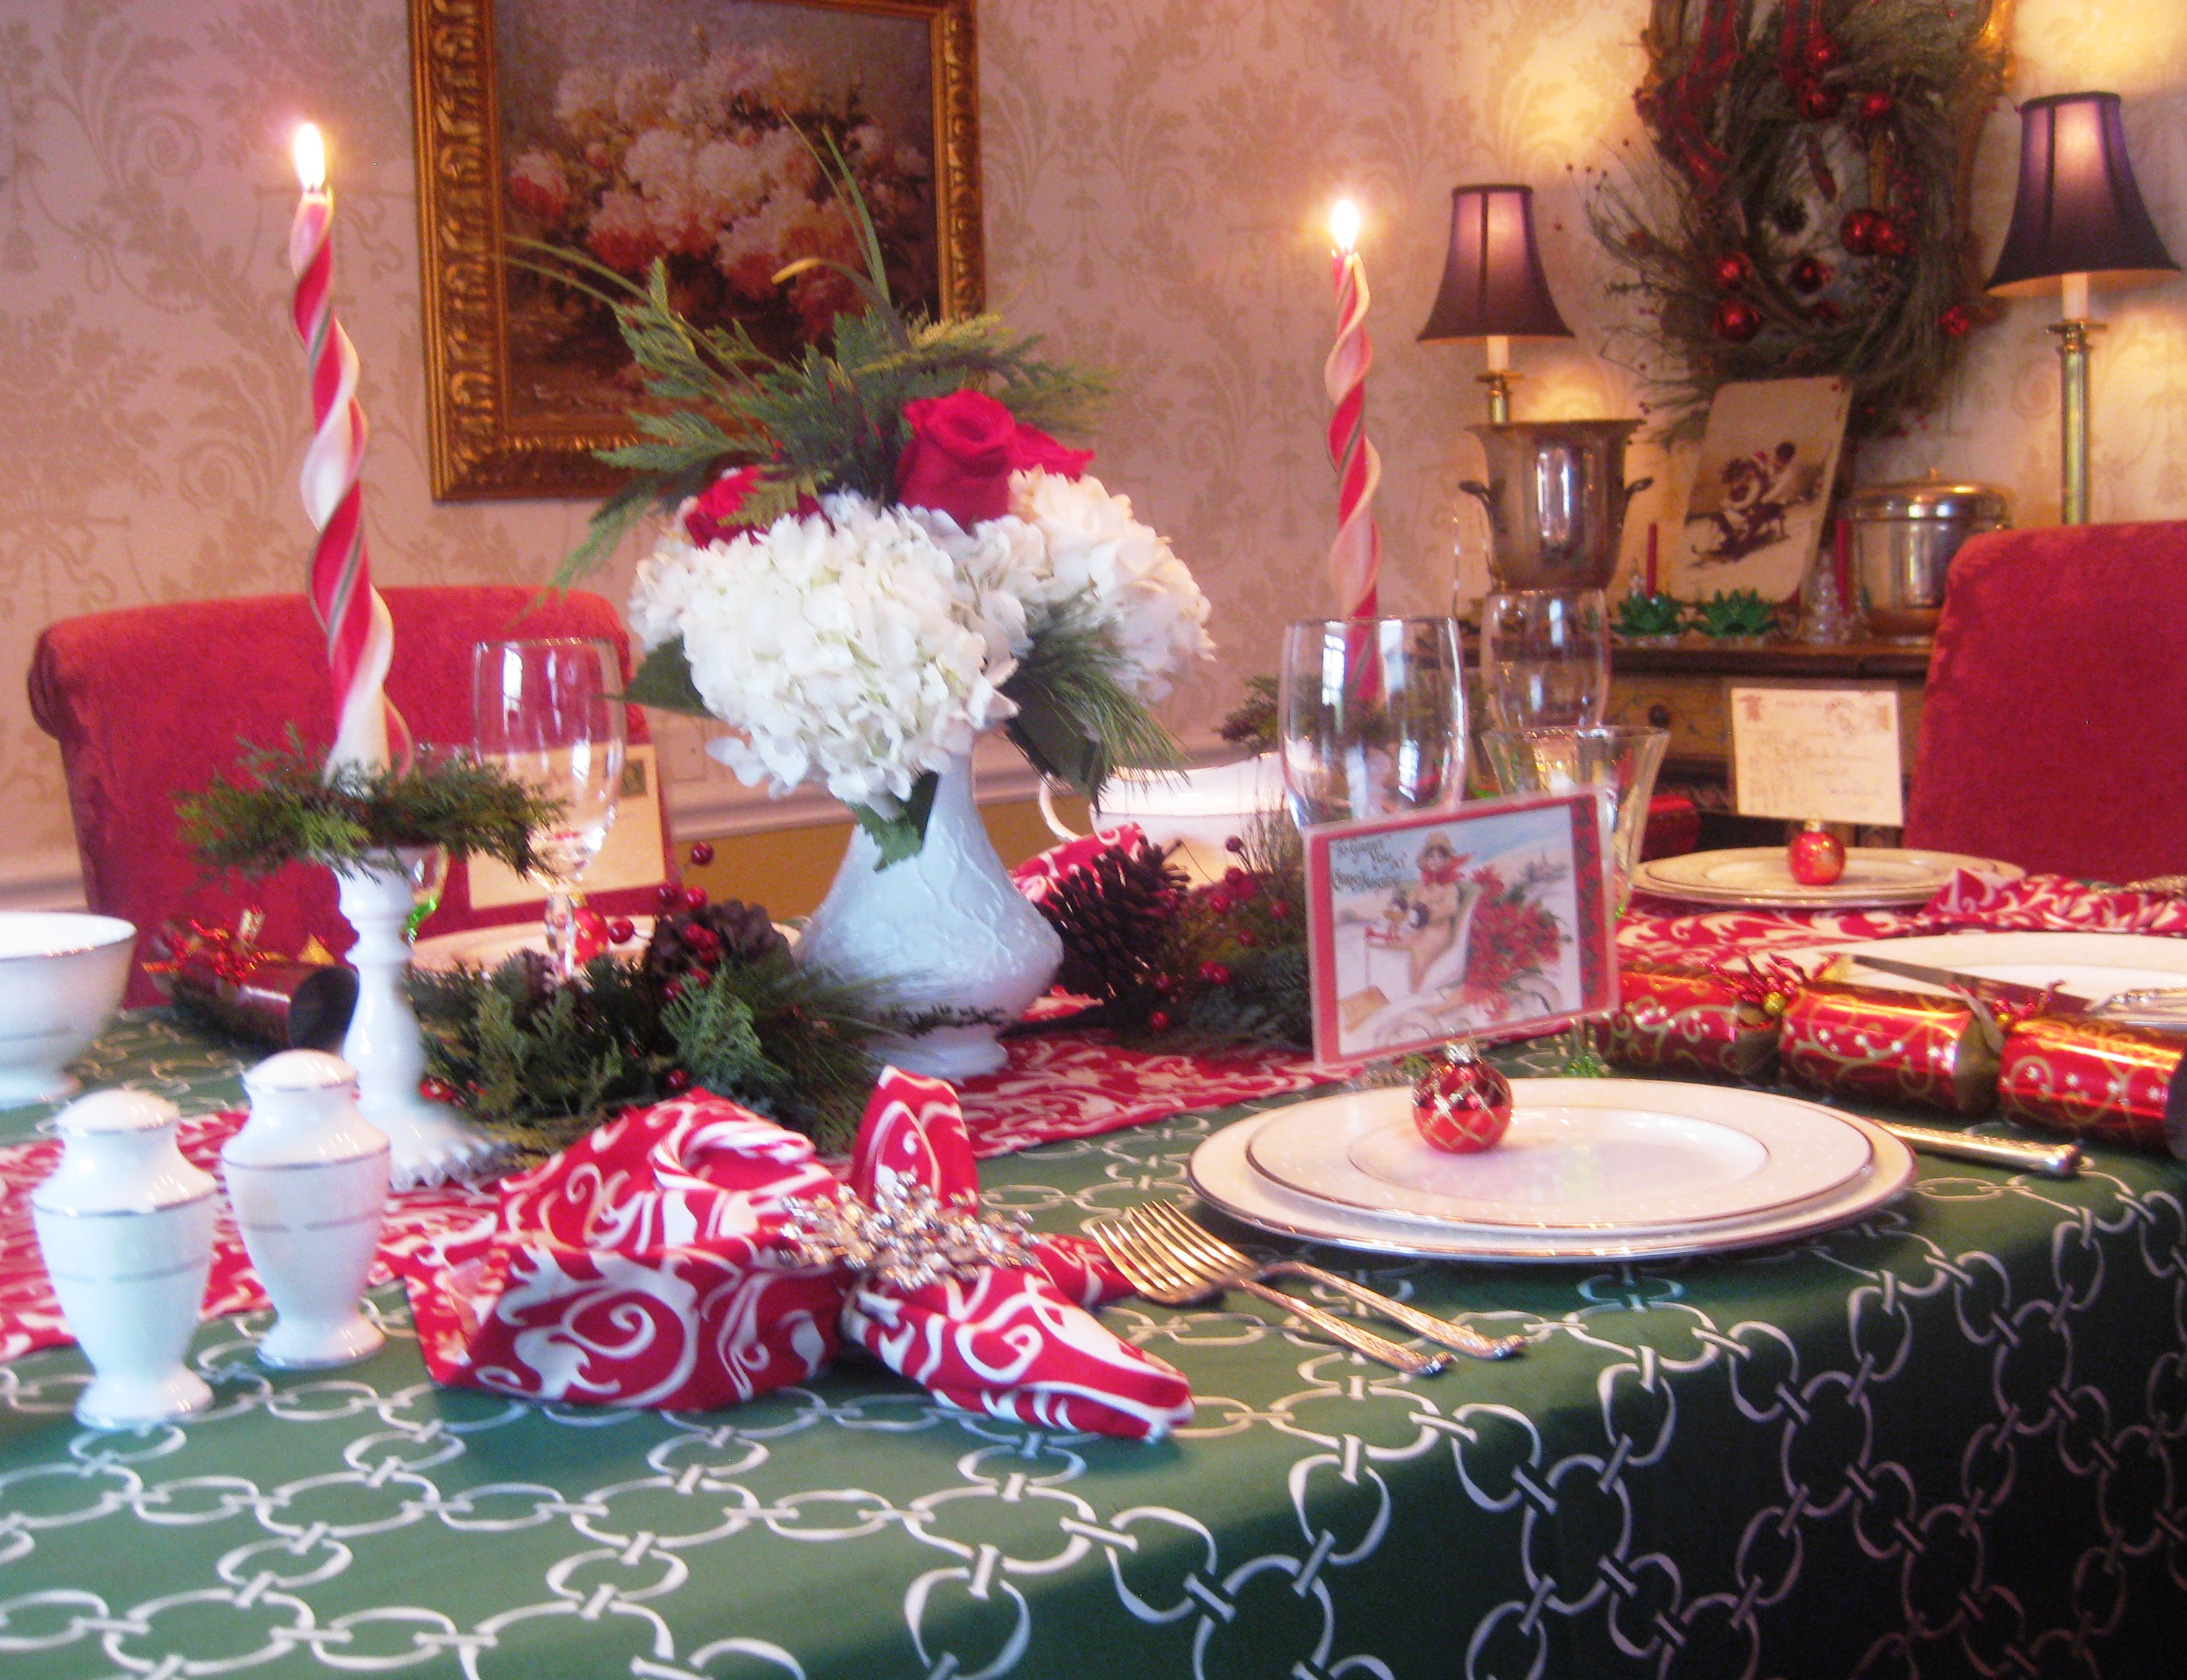 » A Twist on the Traditional Red Door Table Decor